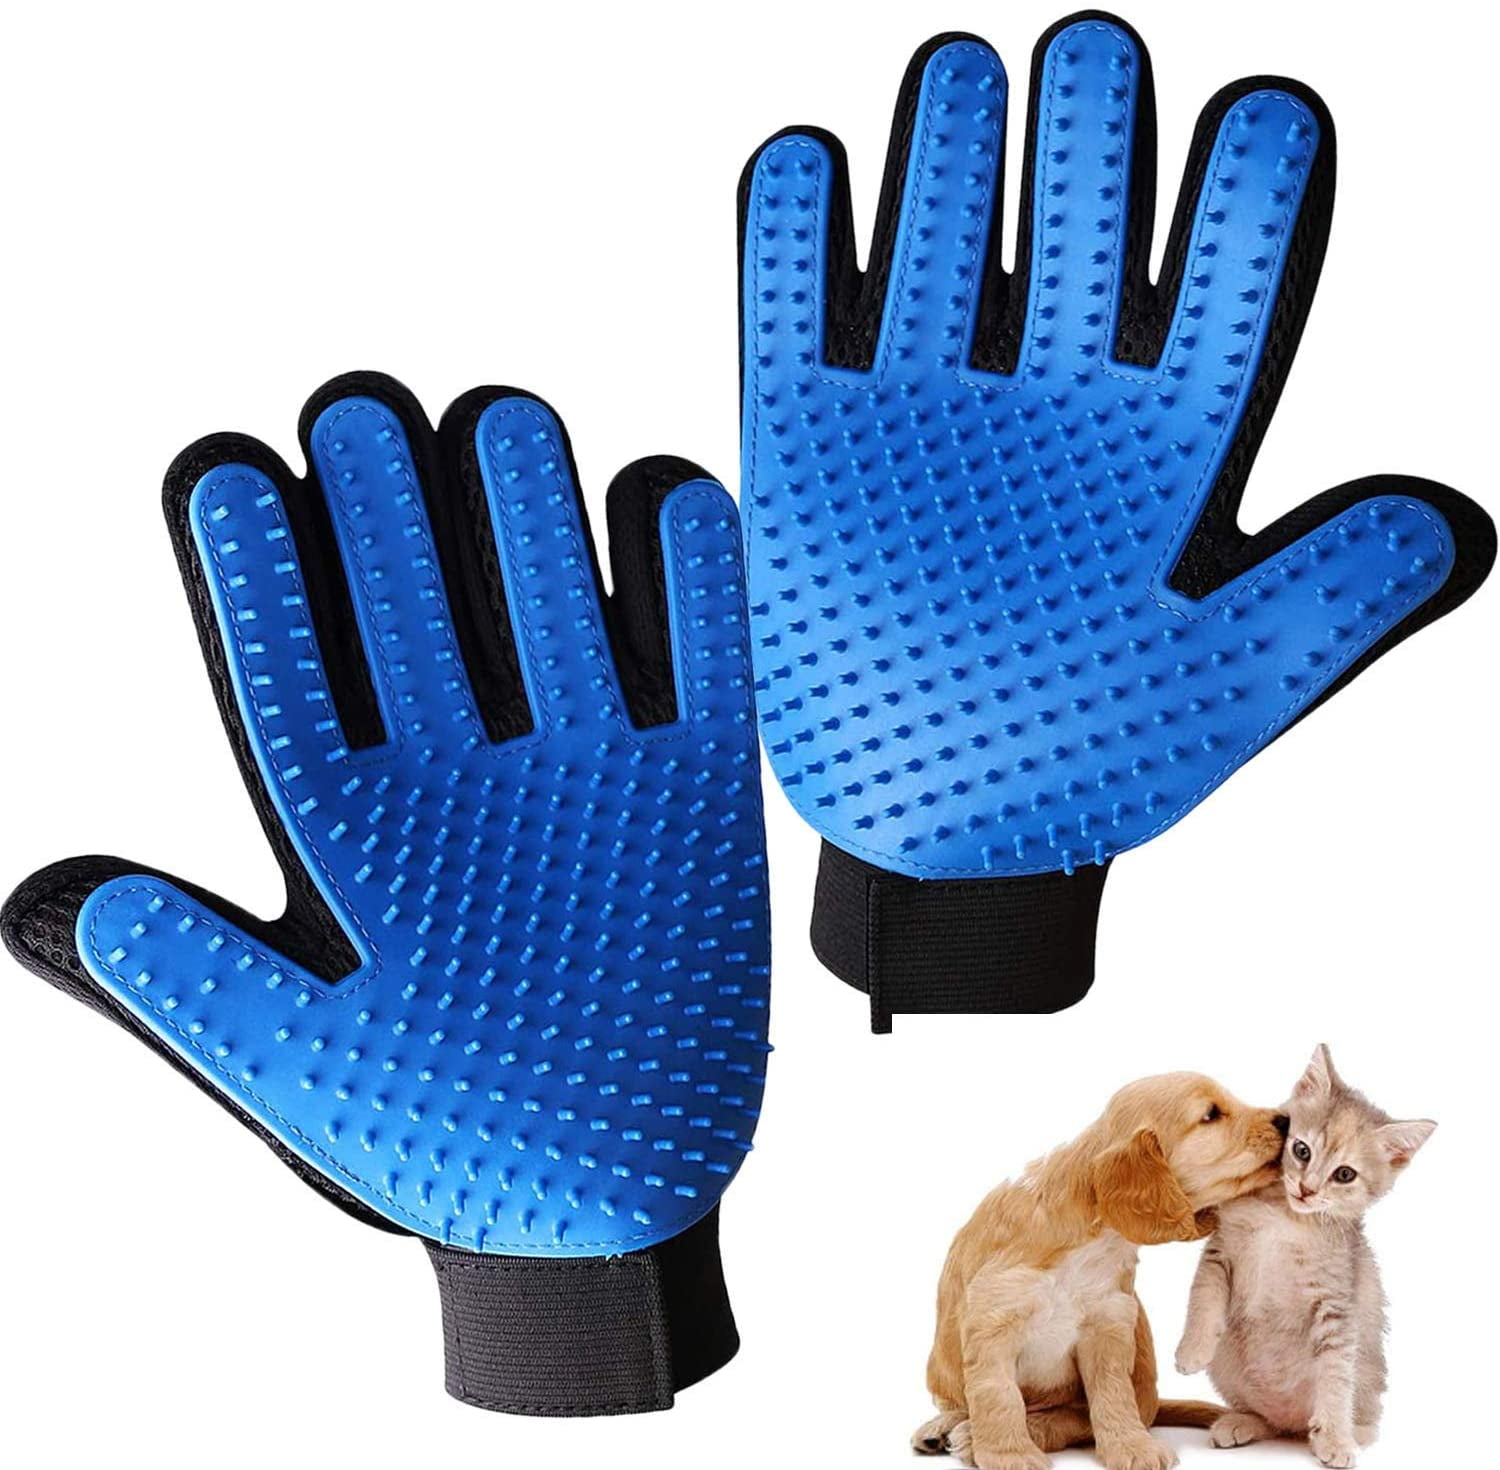 CoreLife Pet Grooming Glove Set For Dogs and Cats Deshedding Gentle Animal Fur 